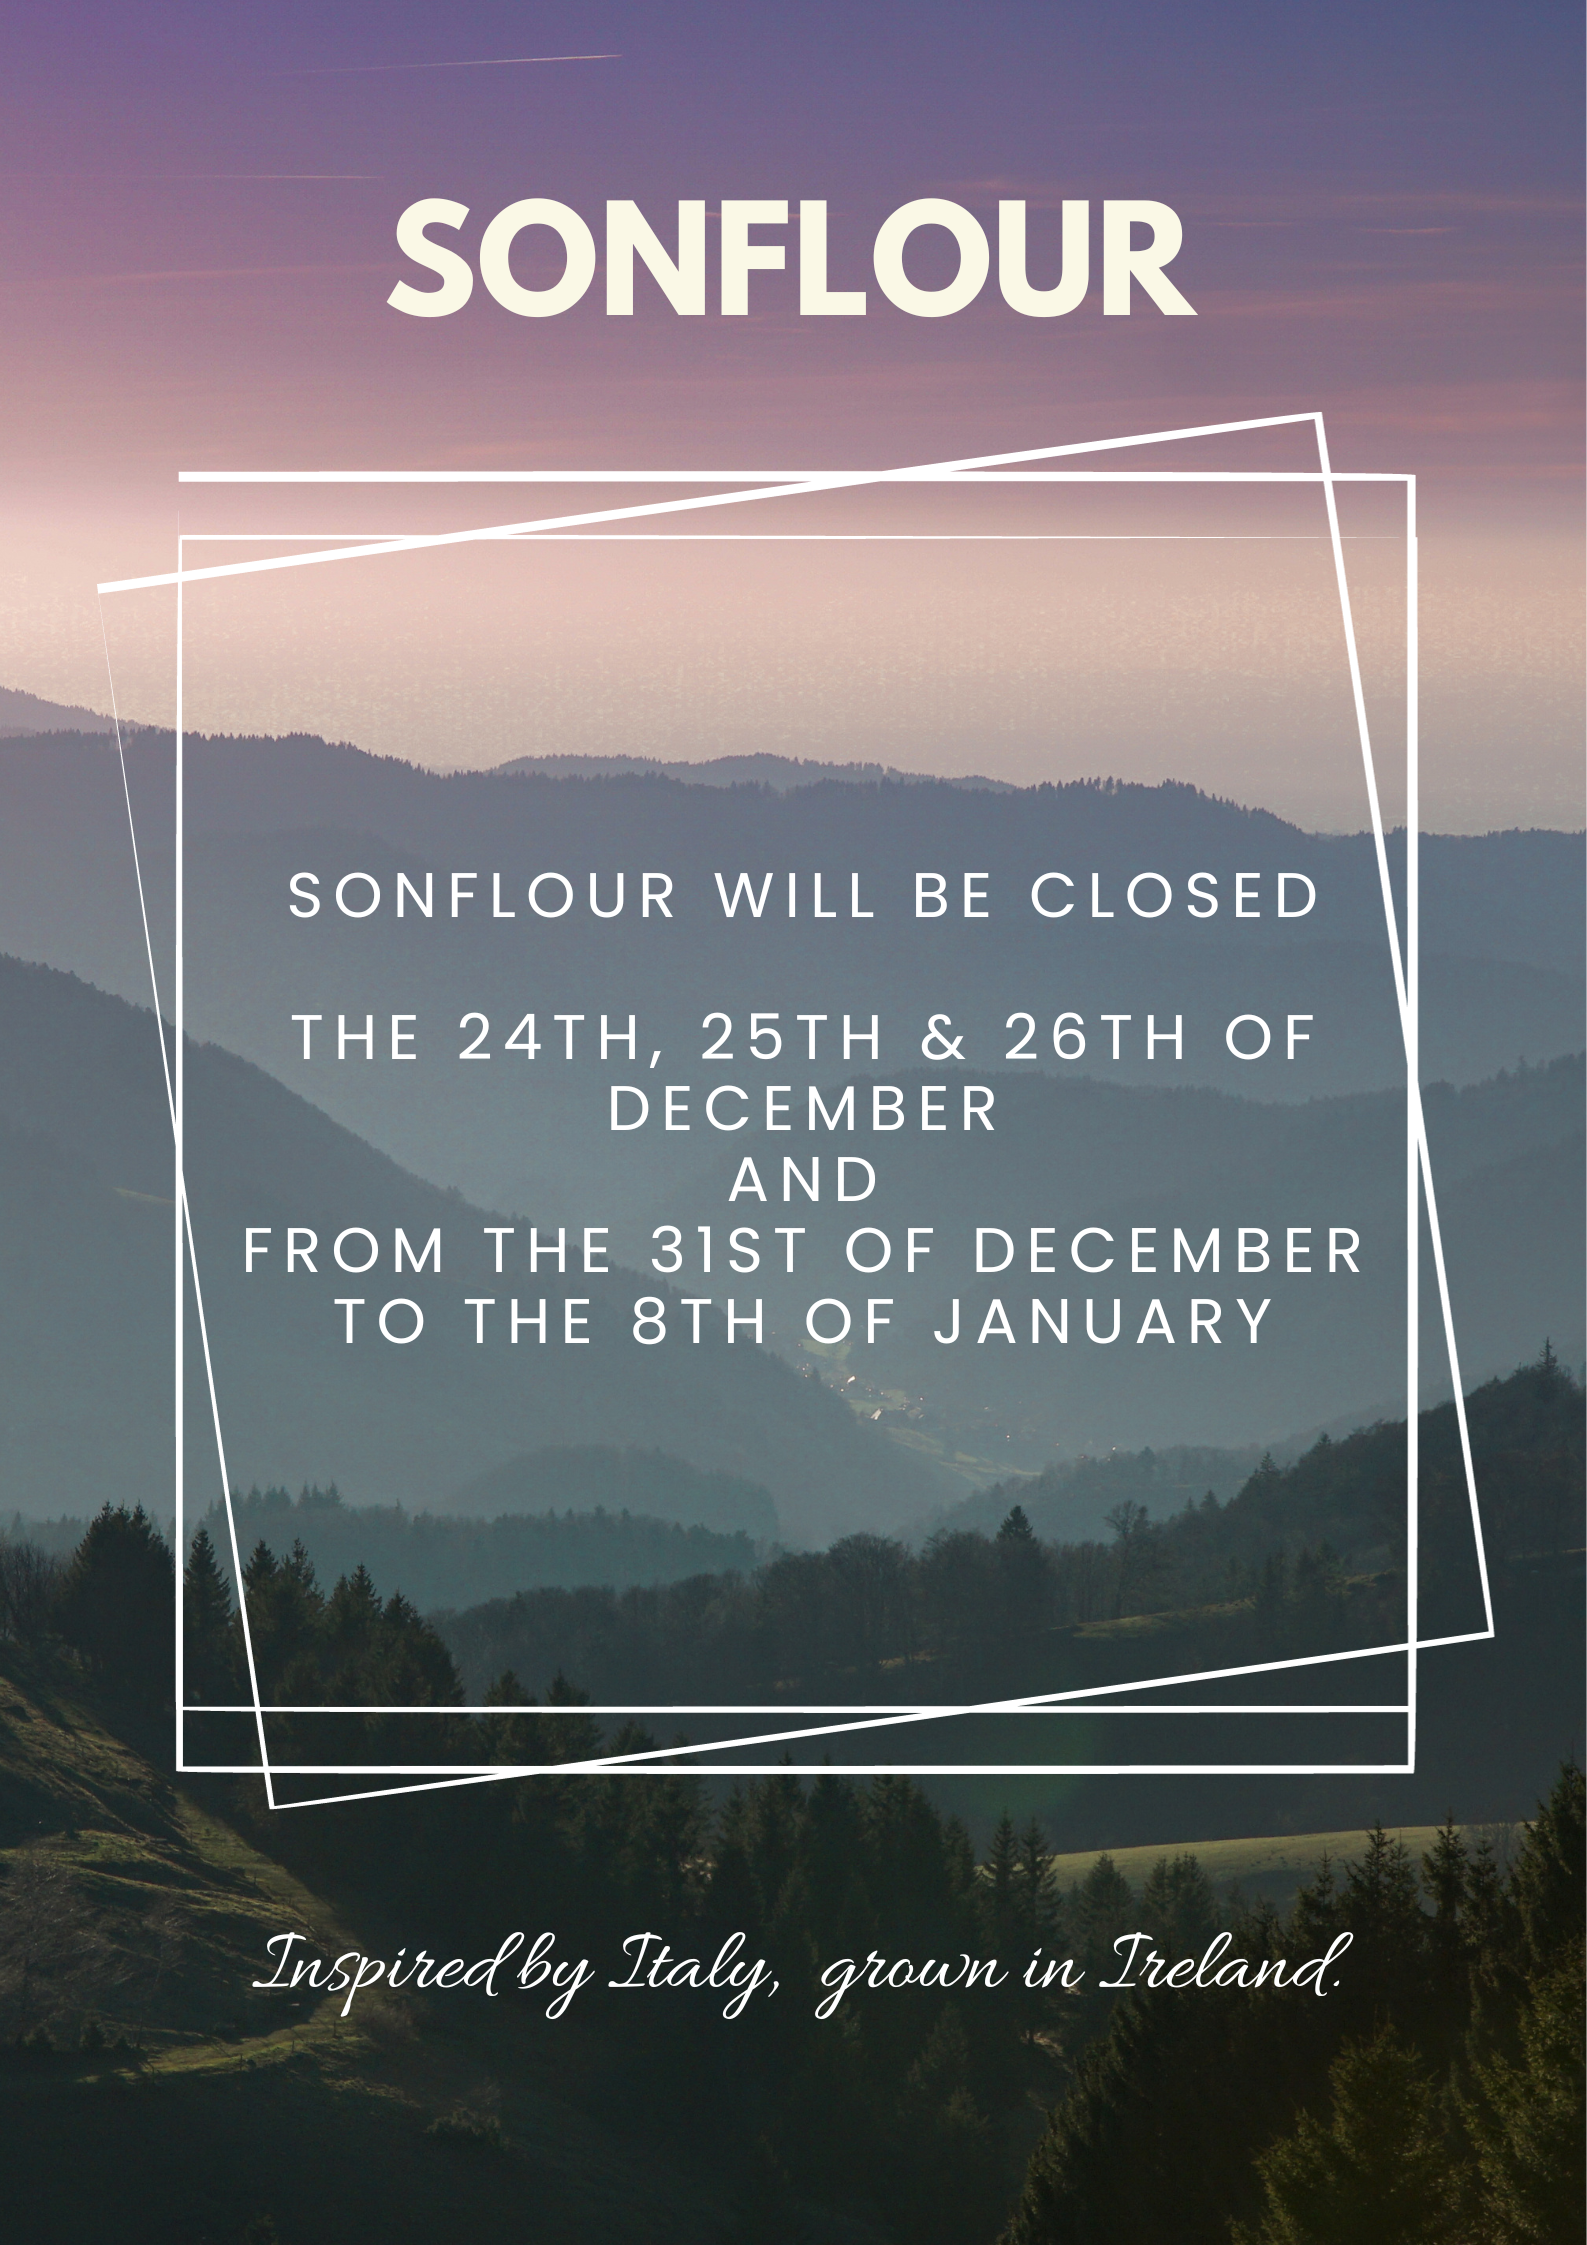 Sonflour winter holiday!